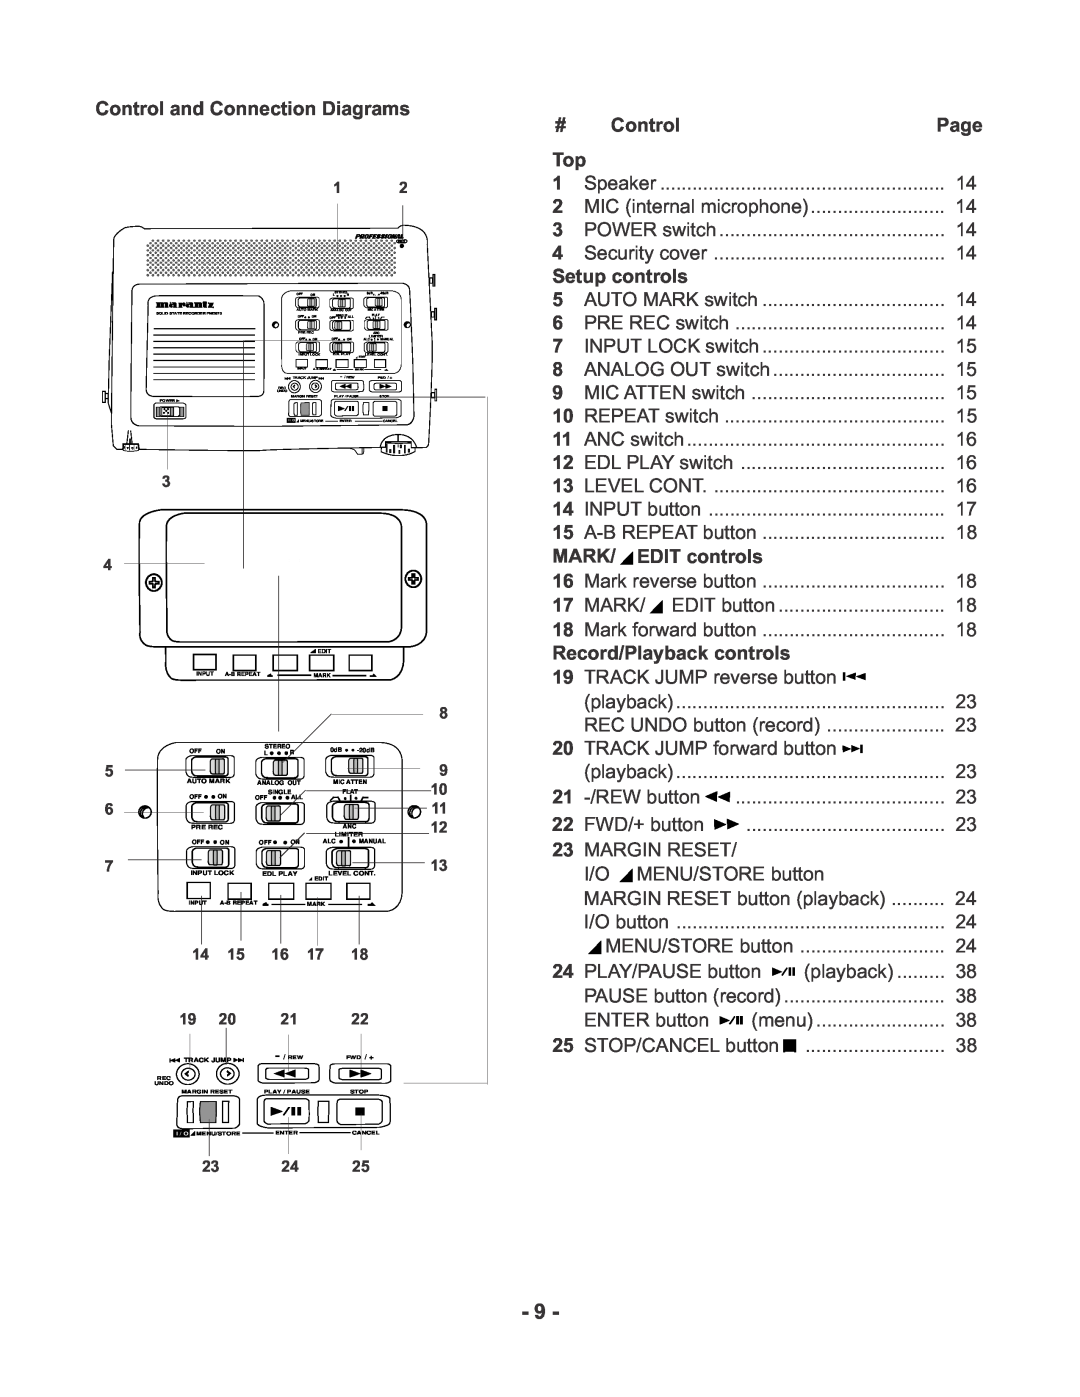 Marantz PMD670 manual Control and Connection Diagrams 